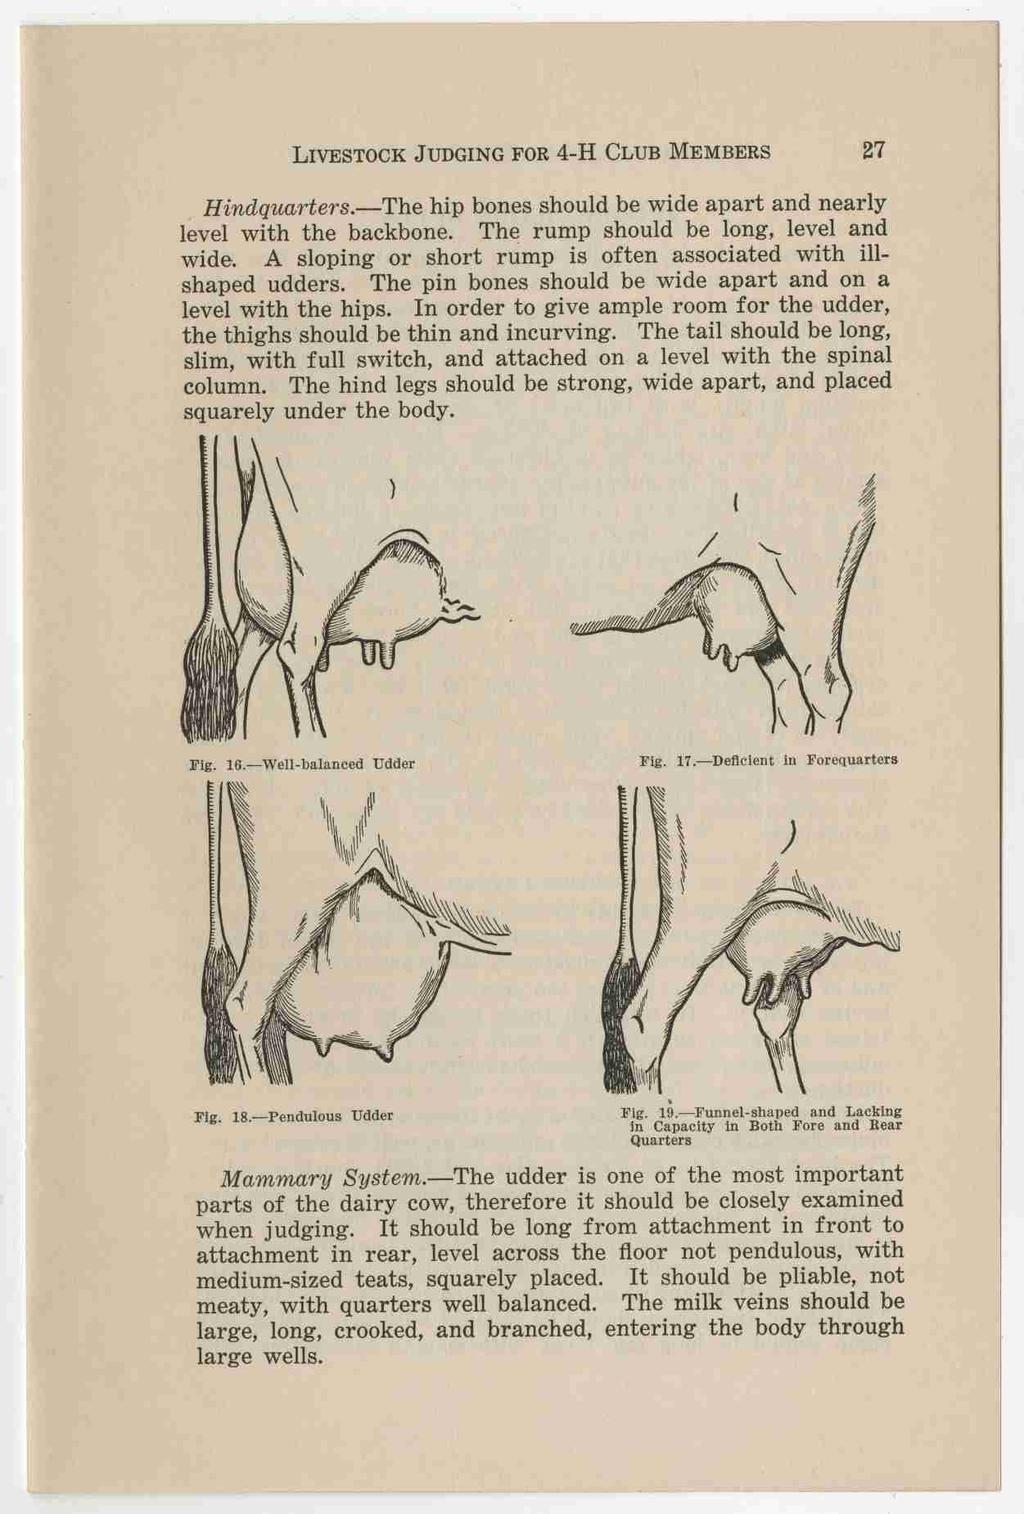 LIVESTOCK J UDGING FOR 4-H CLUB MEMBERS 27, Hindquarters. - The hip bones should be wide apart and nearly level with the backbone. The rump should be long, level and wide.